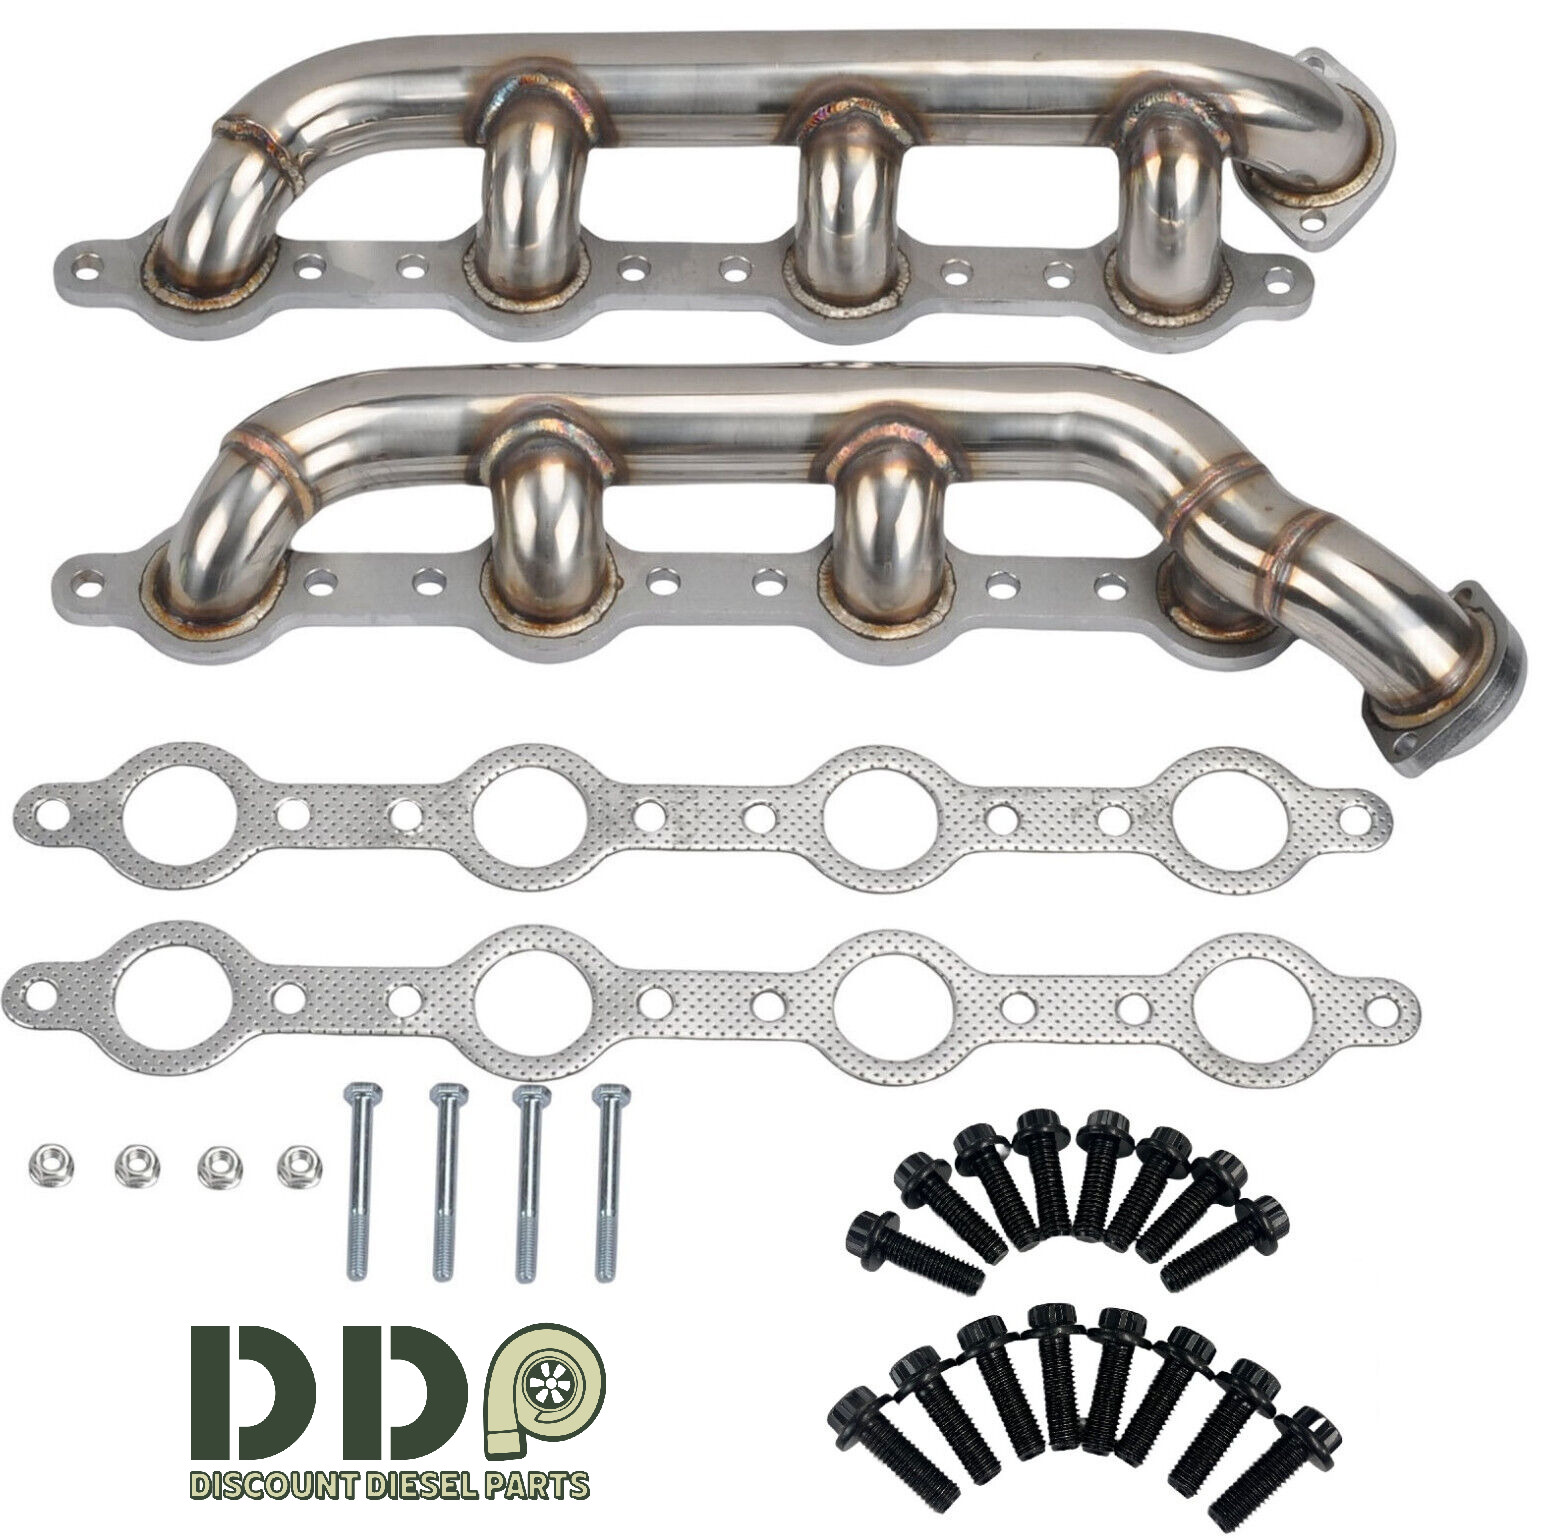 Stainless Steel Headers Manifolds For Ford Powerstroke F250 F350 F450 7.3L 99-03